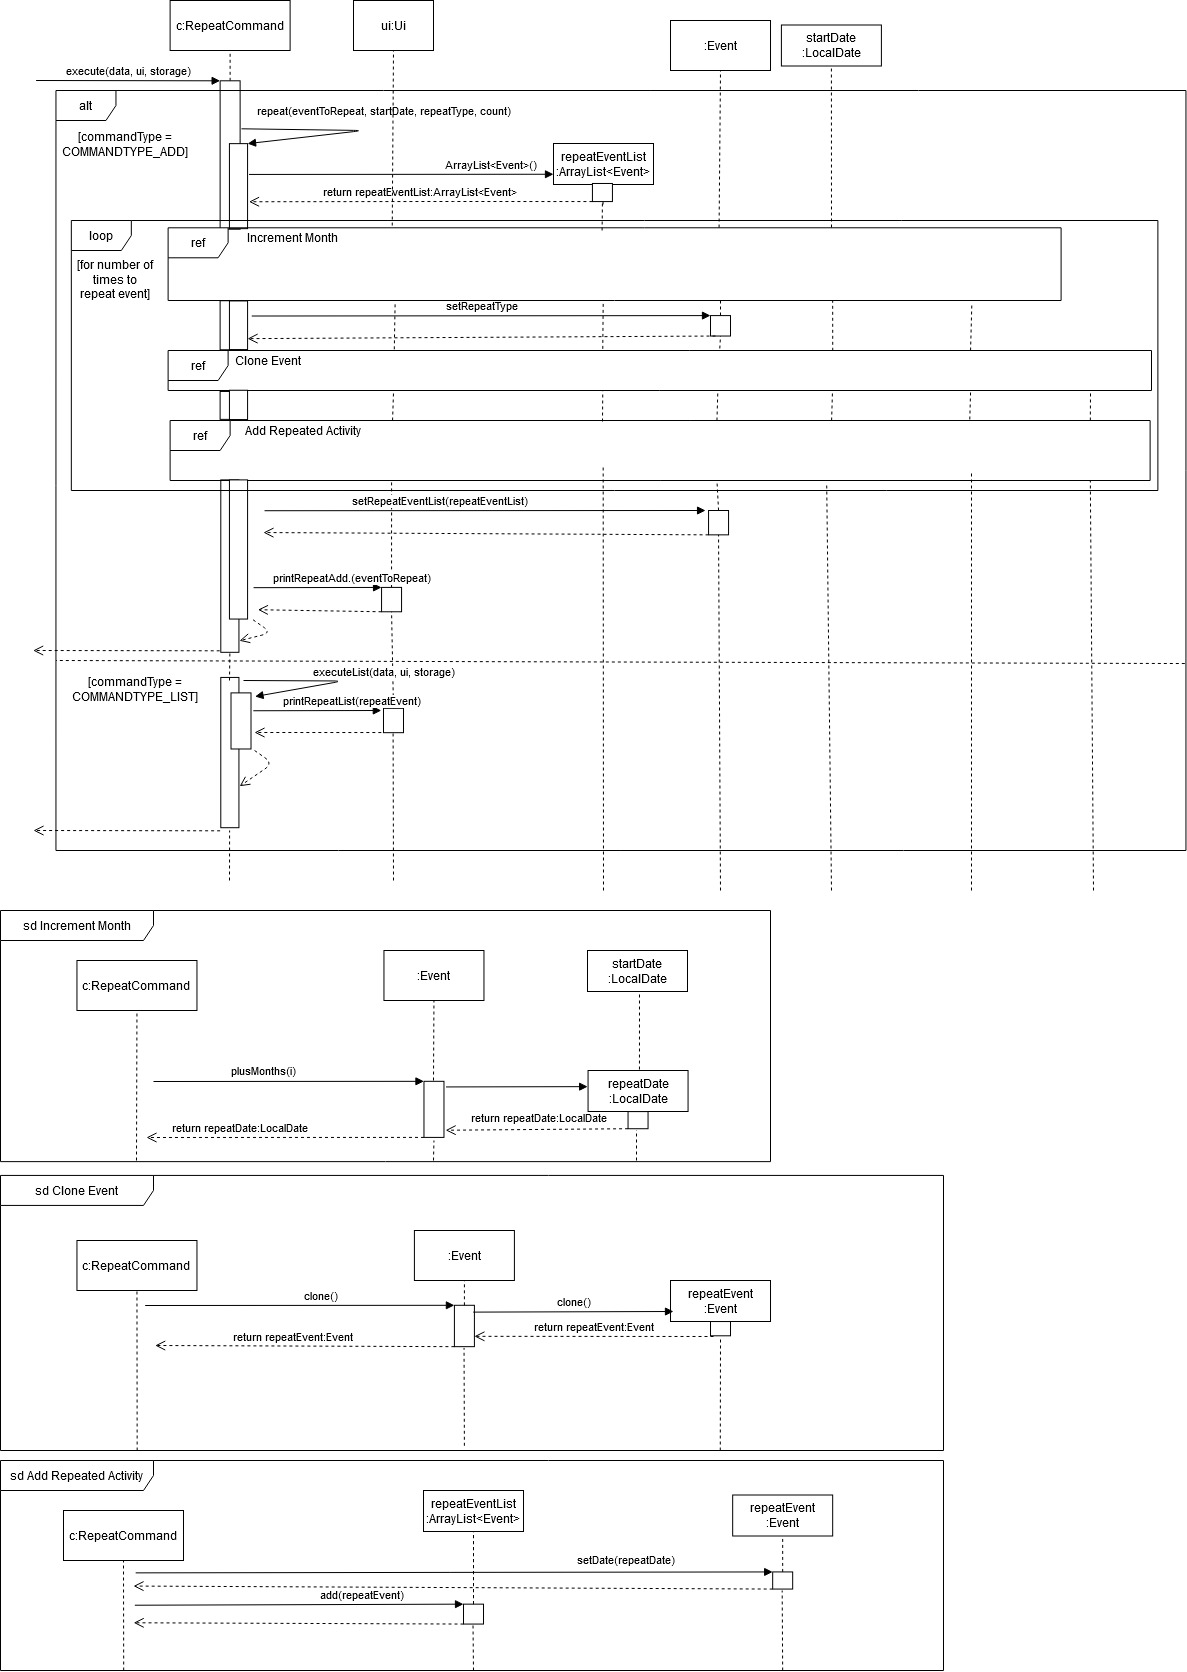 Sequence Diagram for Repeat Command